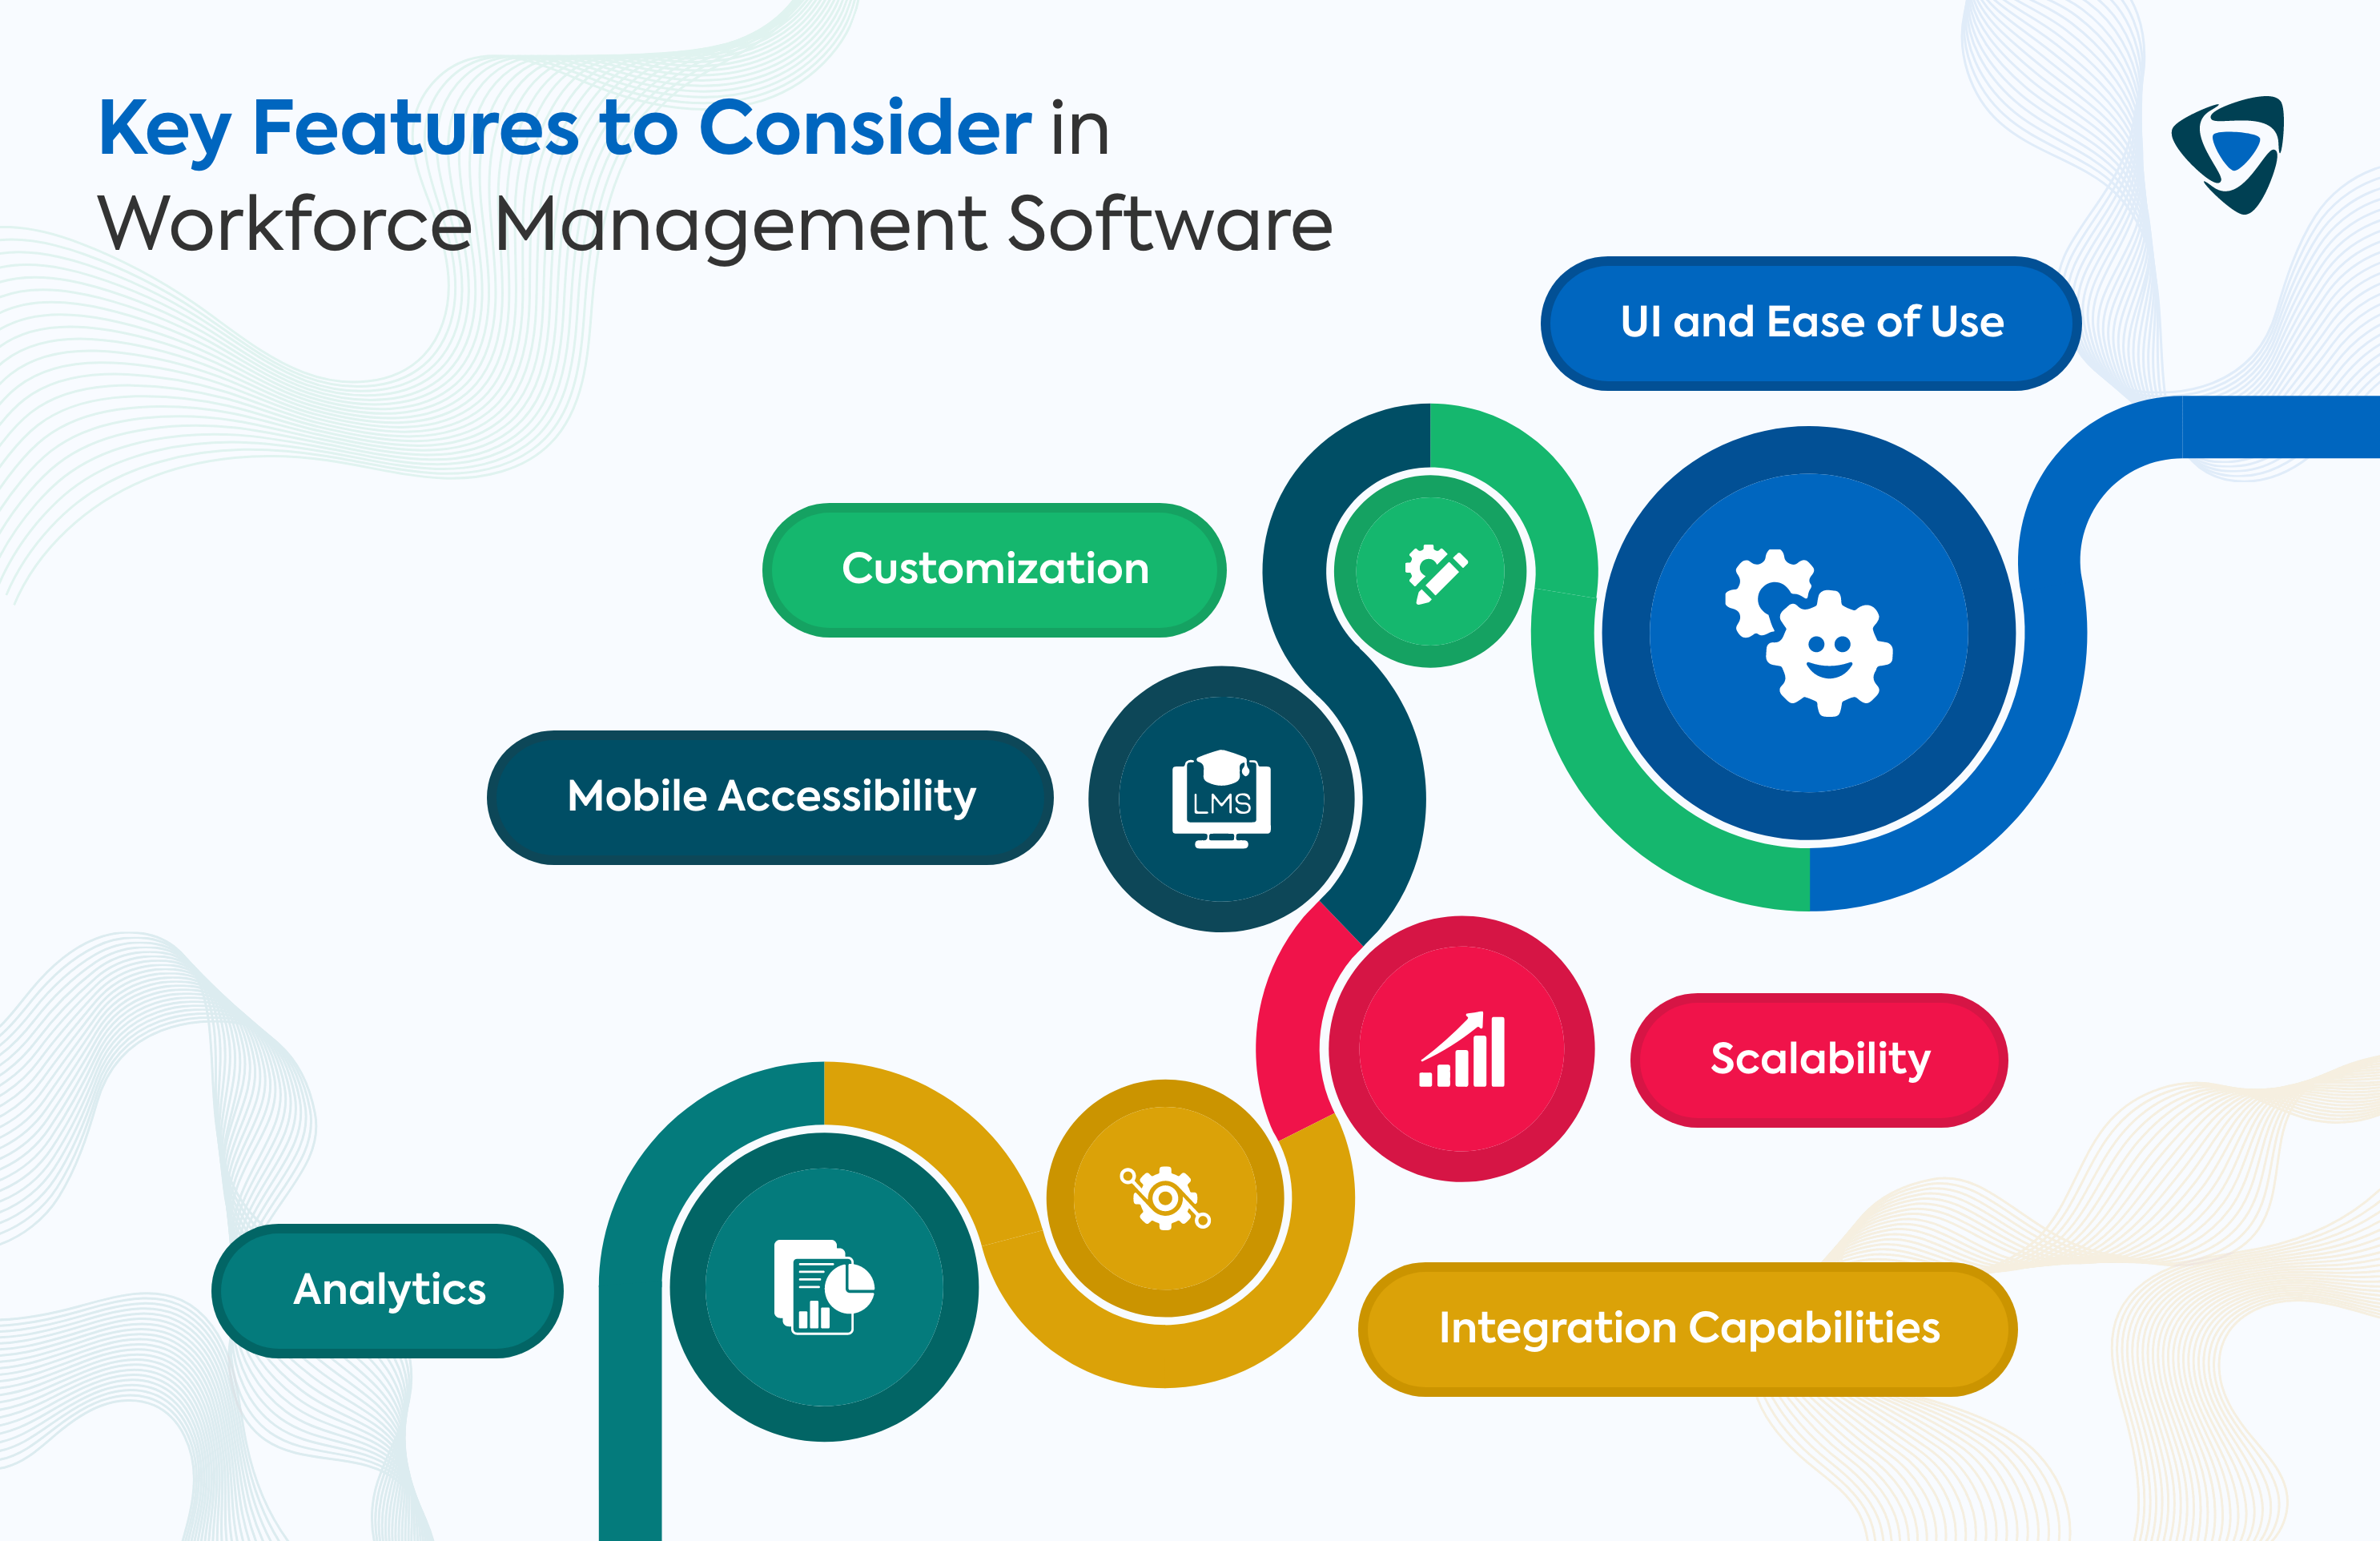 Key Features to Consider in Workforce Management Software